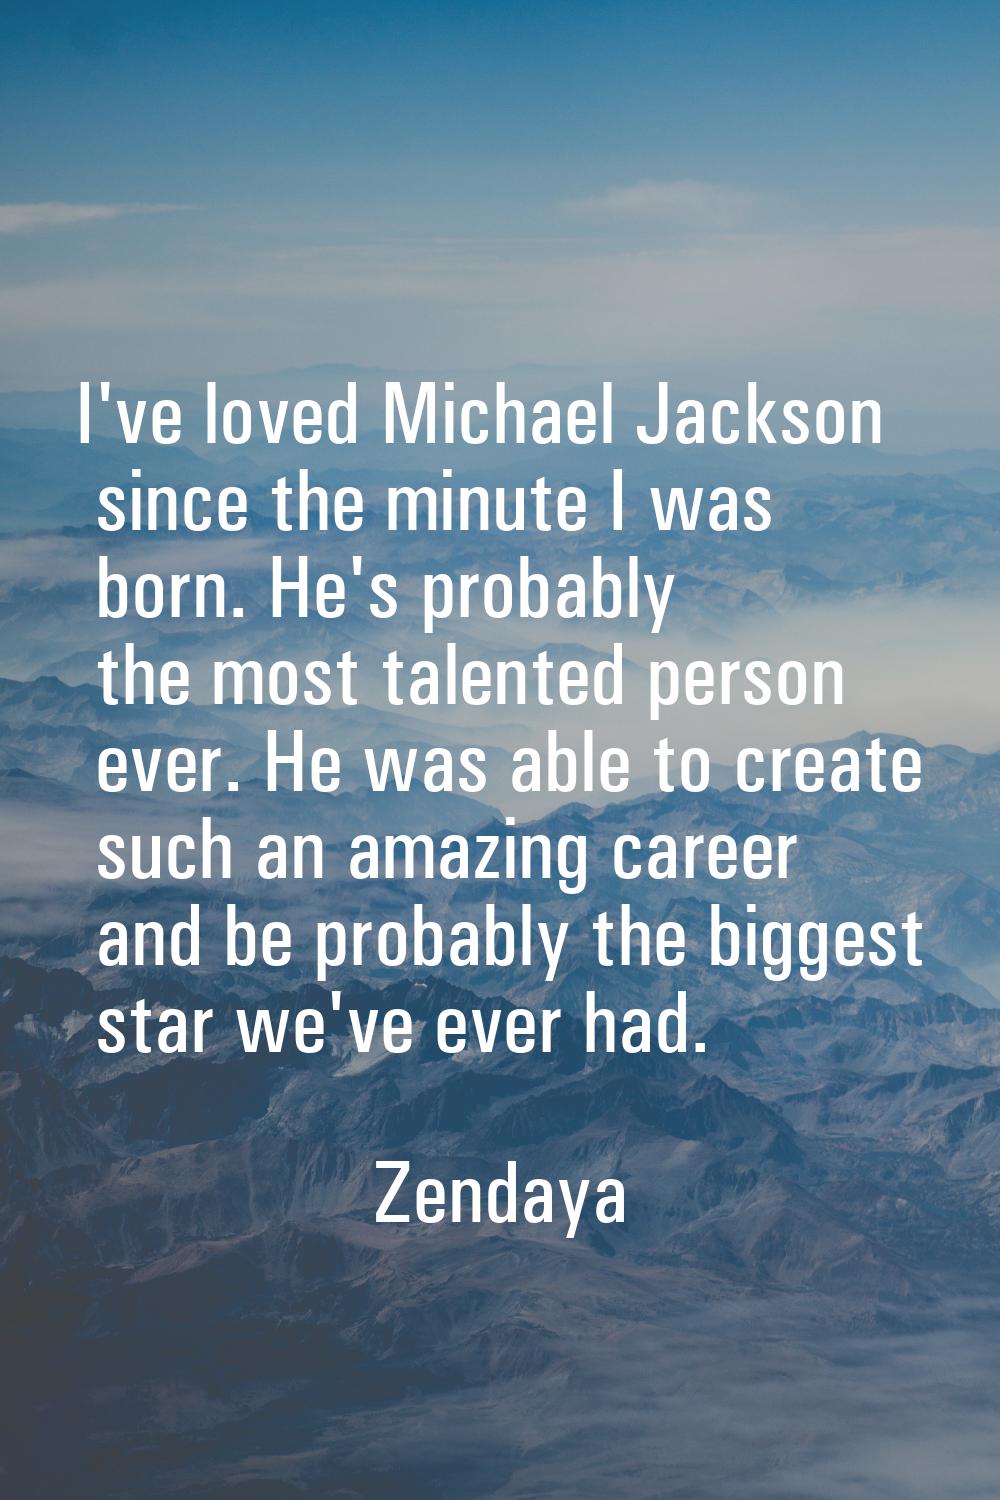 I've loved Michael Jackson since the minute I was born. He's probably the most talented person ever